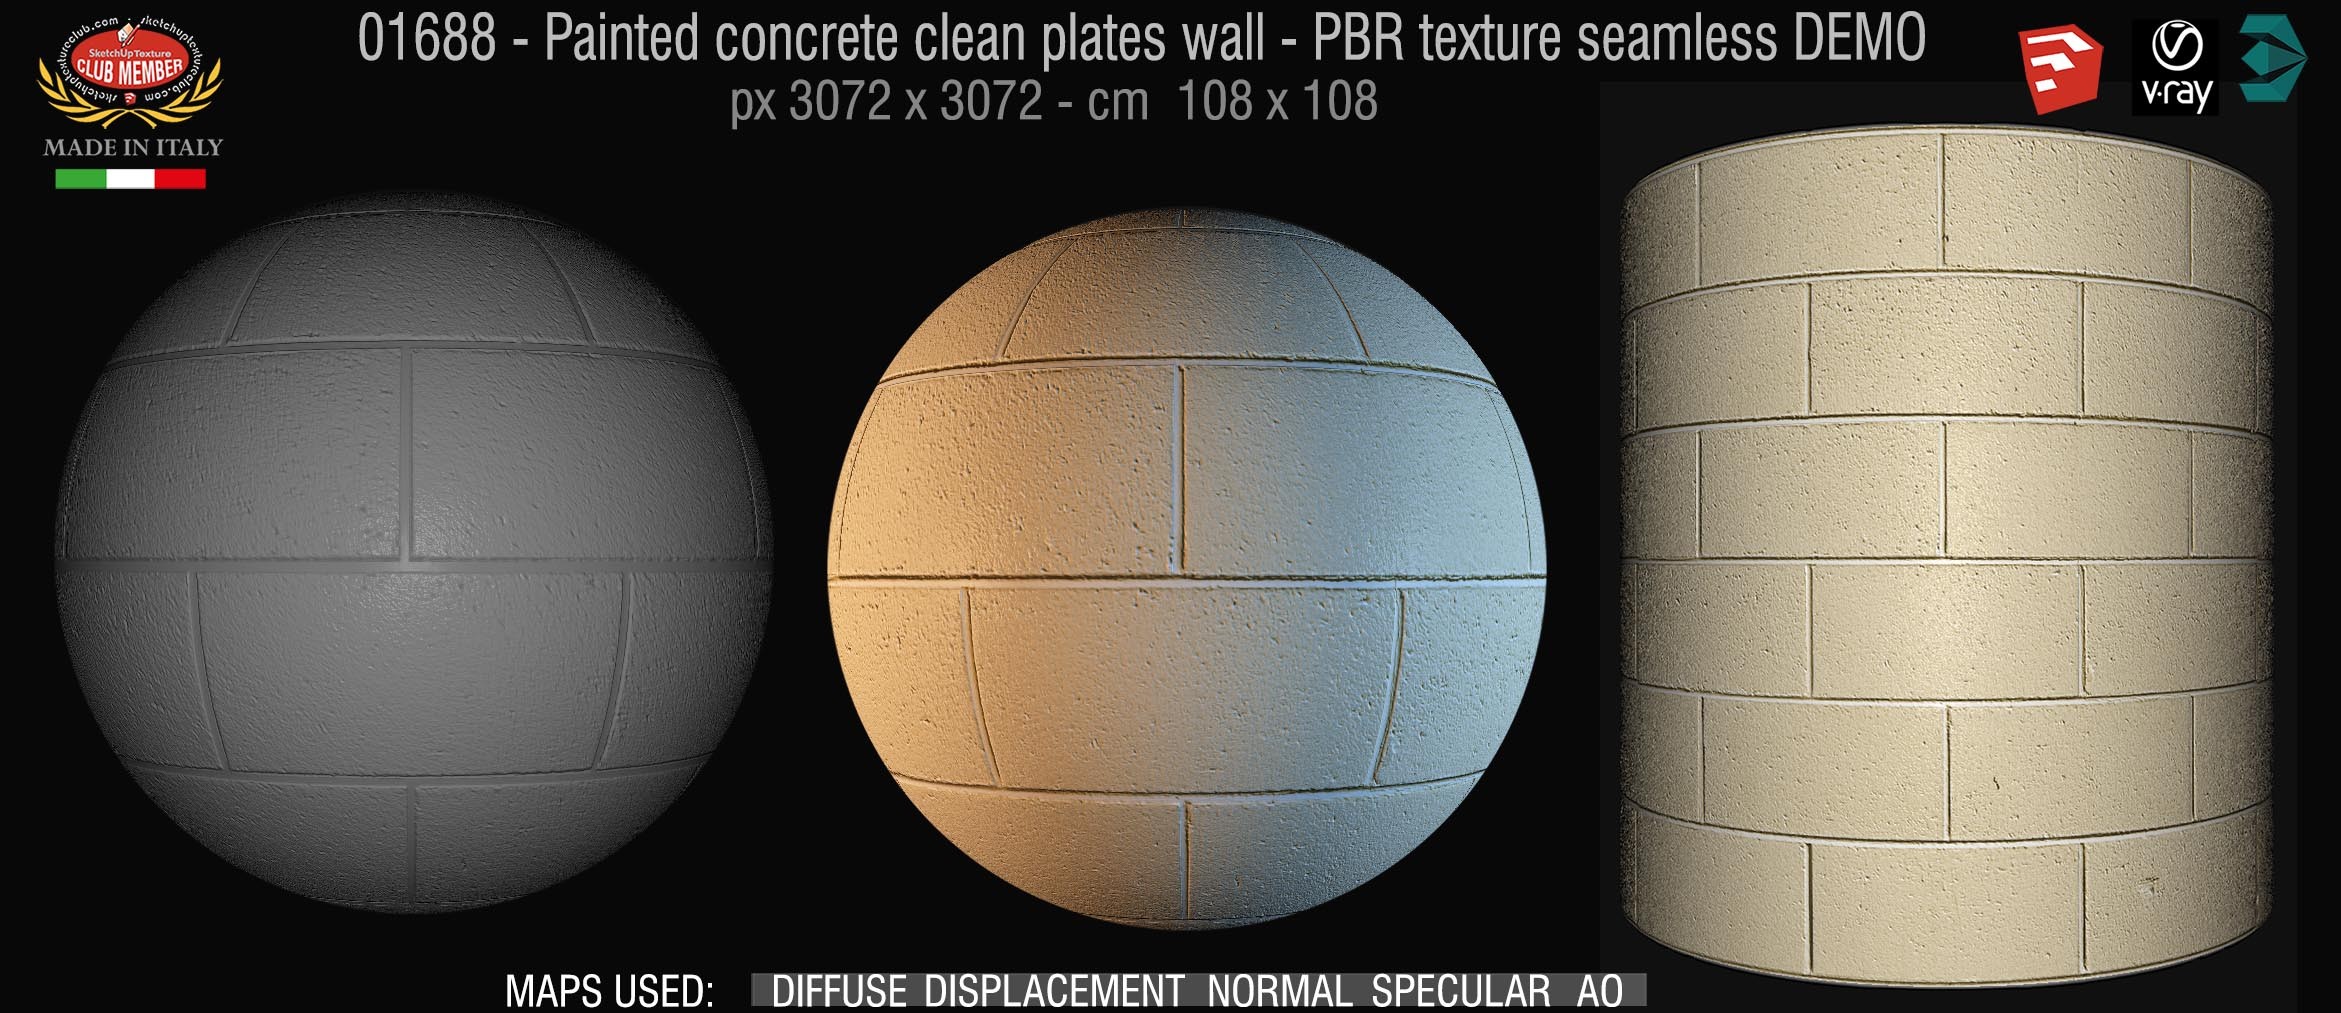 01688 Painted concrete clean plates wall PBR texture seamless DEMO